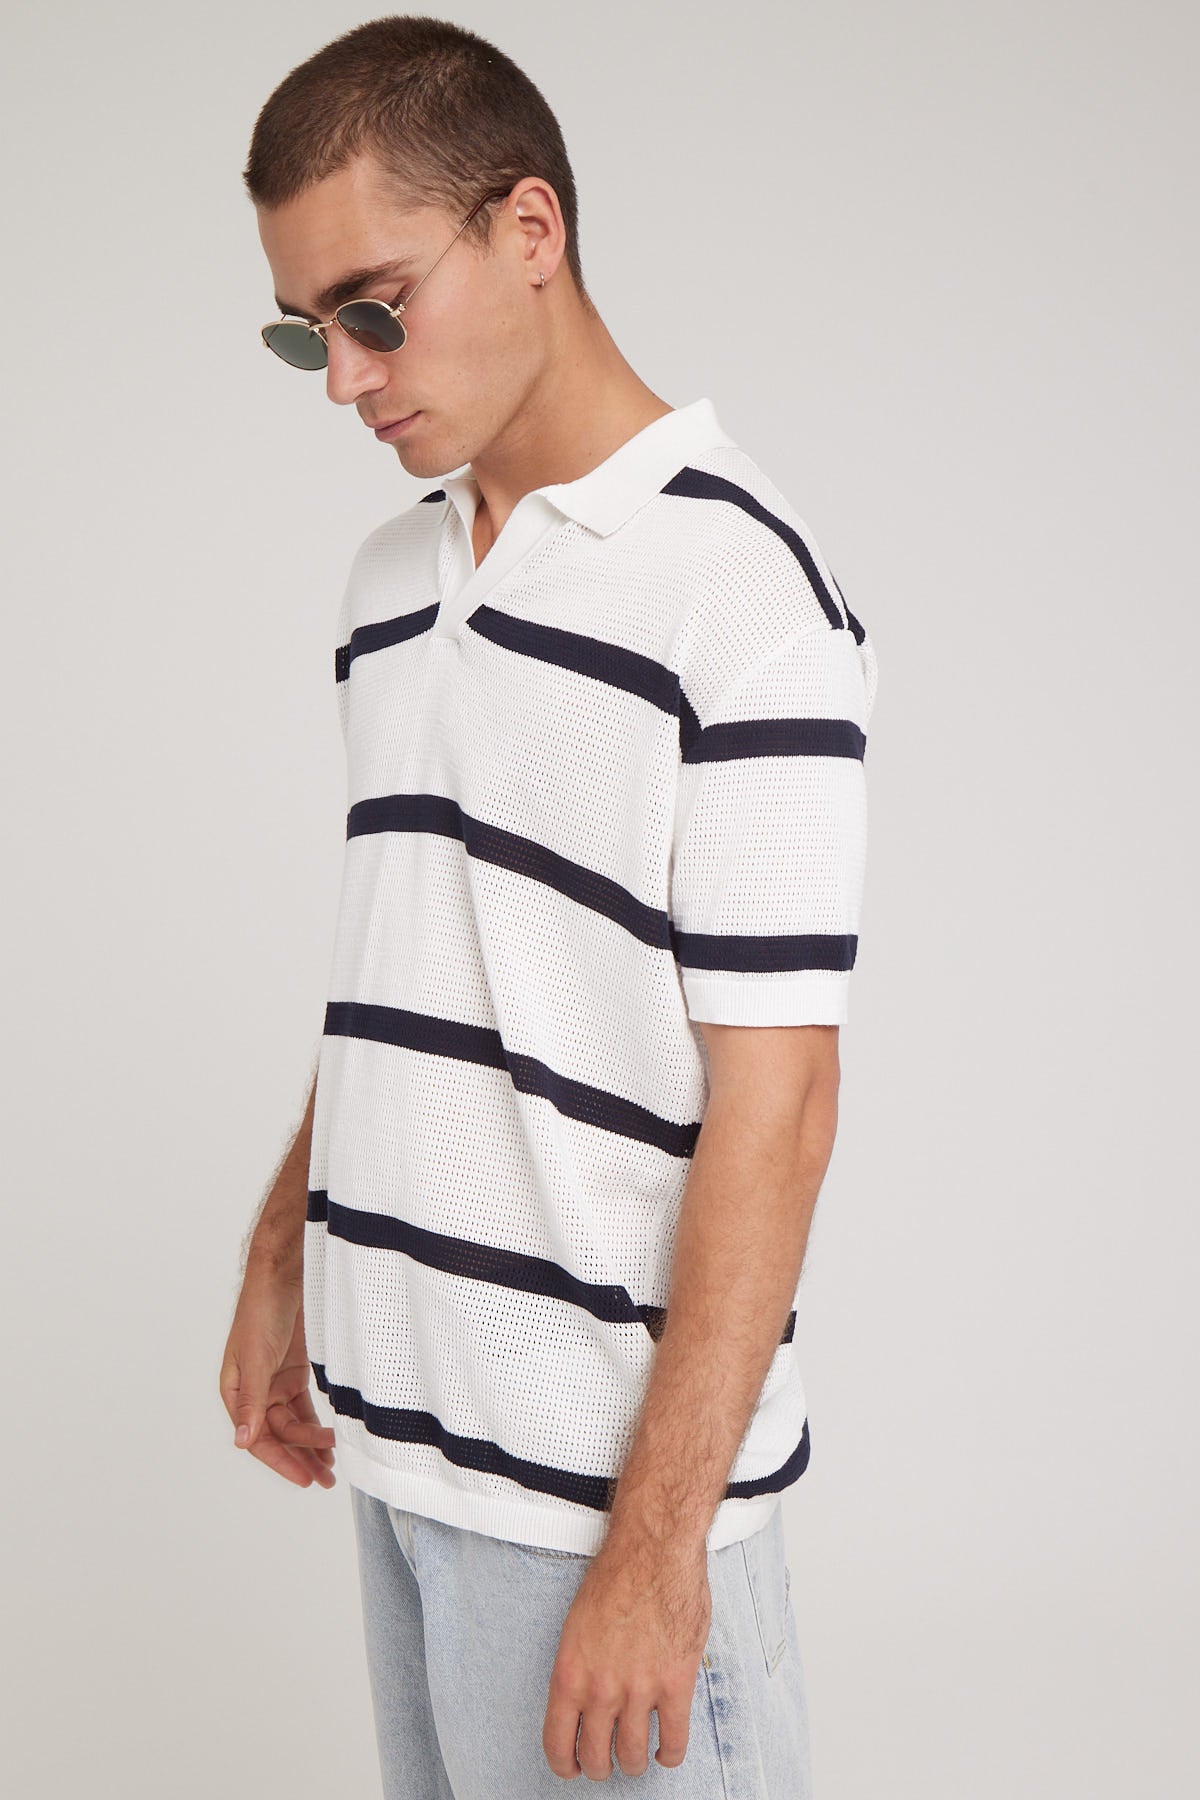 Common Need Port Knit Polo Off White/Navy